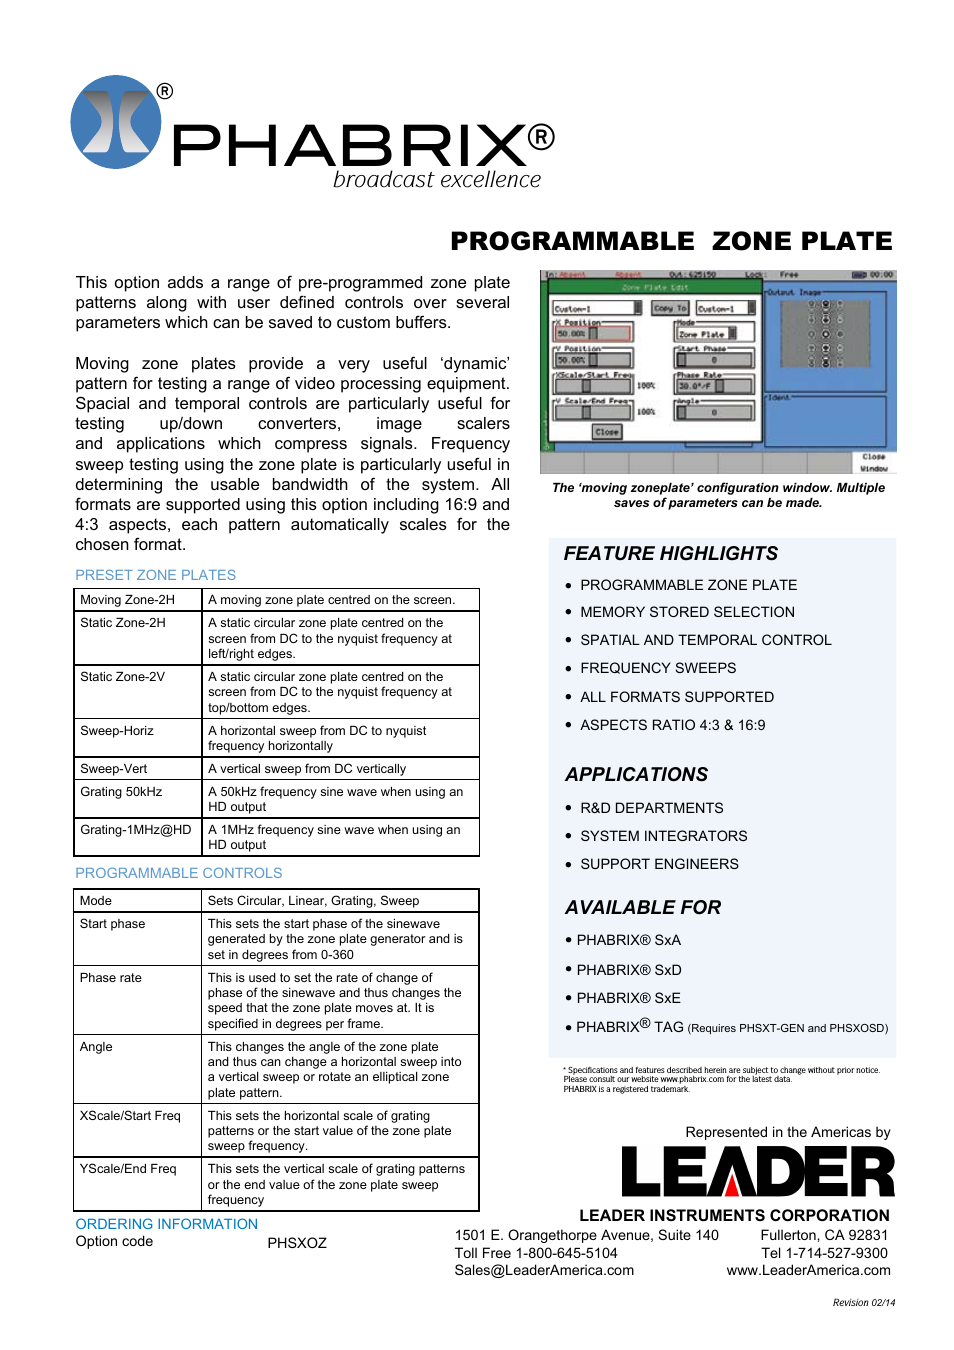 PHABRIX PROGRAMMABLE ZONE PLATE